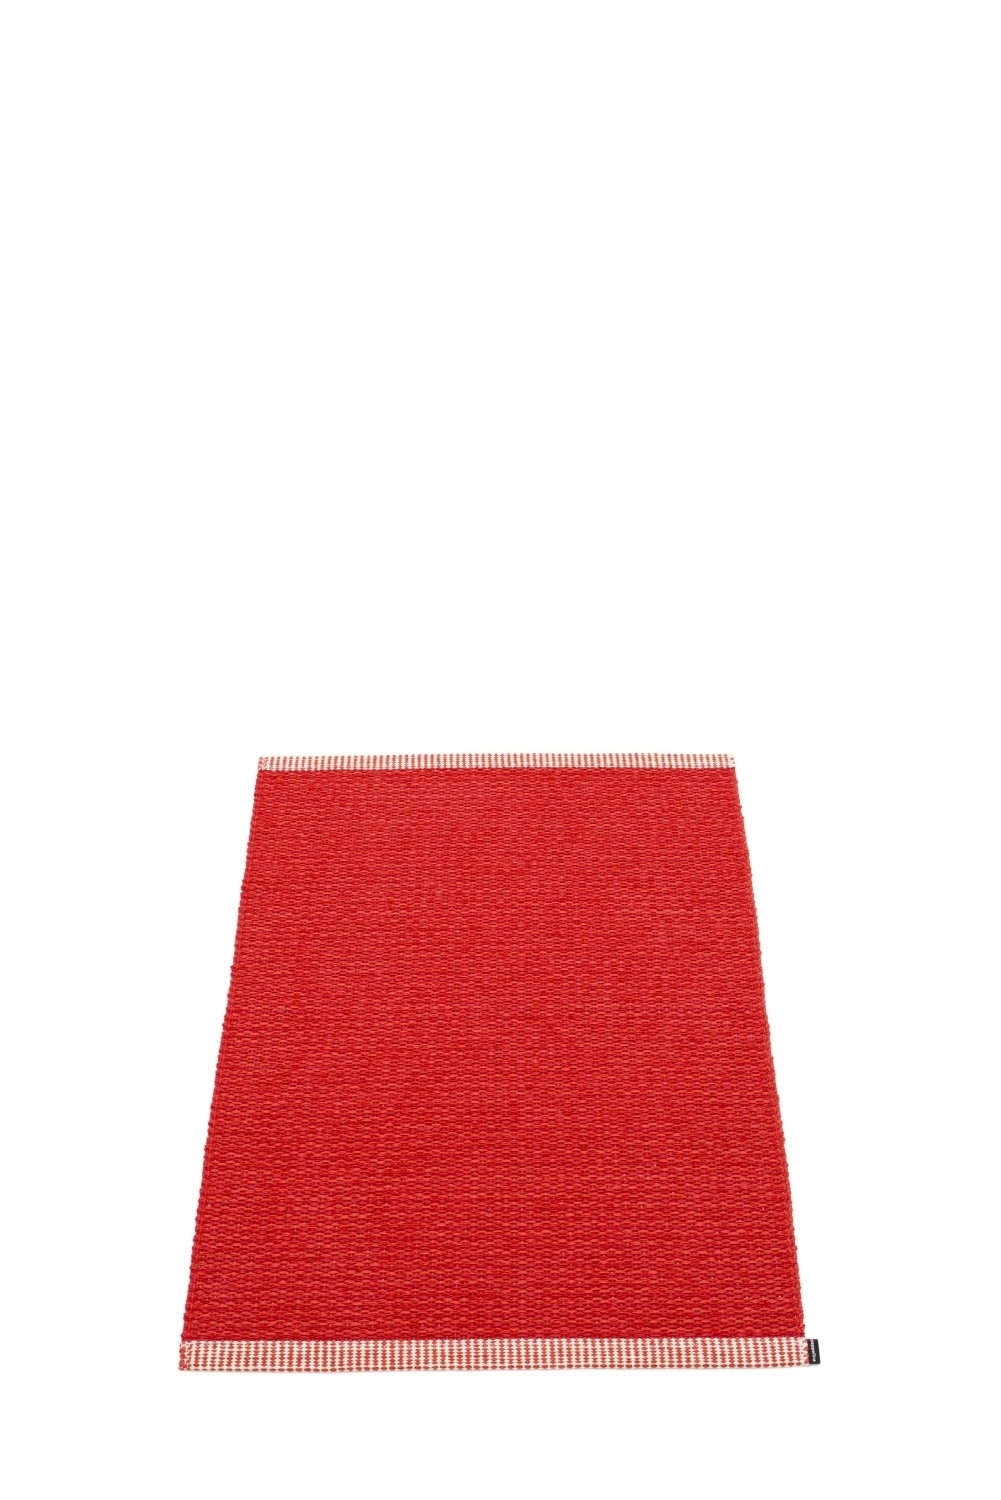 Mono Teppich- Red/ Coral Red- 85 X 160 Cm Rot 0